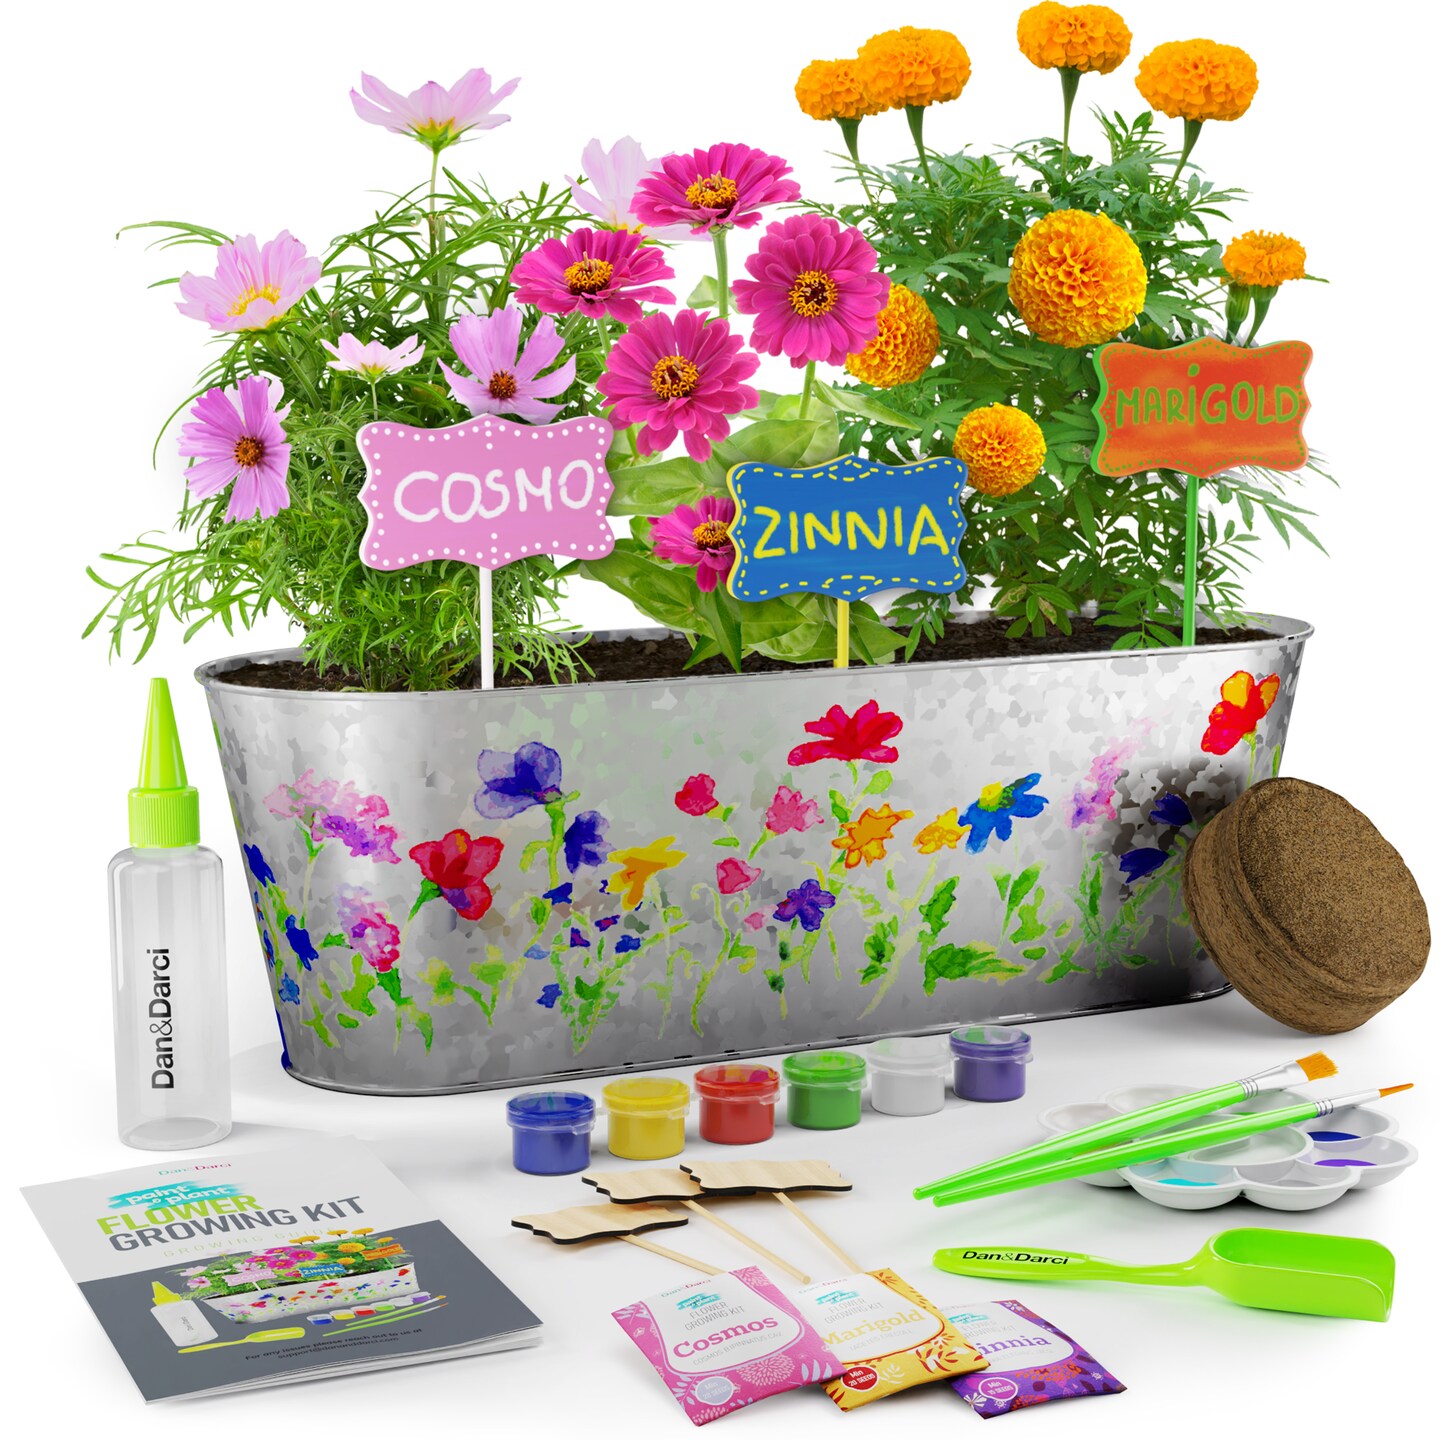 Paint &#x26; Plant Flower Growing Kit for Kids - Best Birthday Crafts Gifts for Girls &#x26; Boys Age 5 6 7 8-12 Year Old Girl Gift Ideas - Fun Children Gardening Kits, Art Projects Toys for Ages 5-12 Years